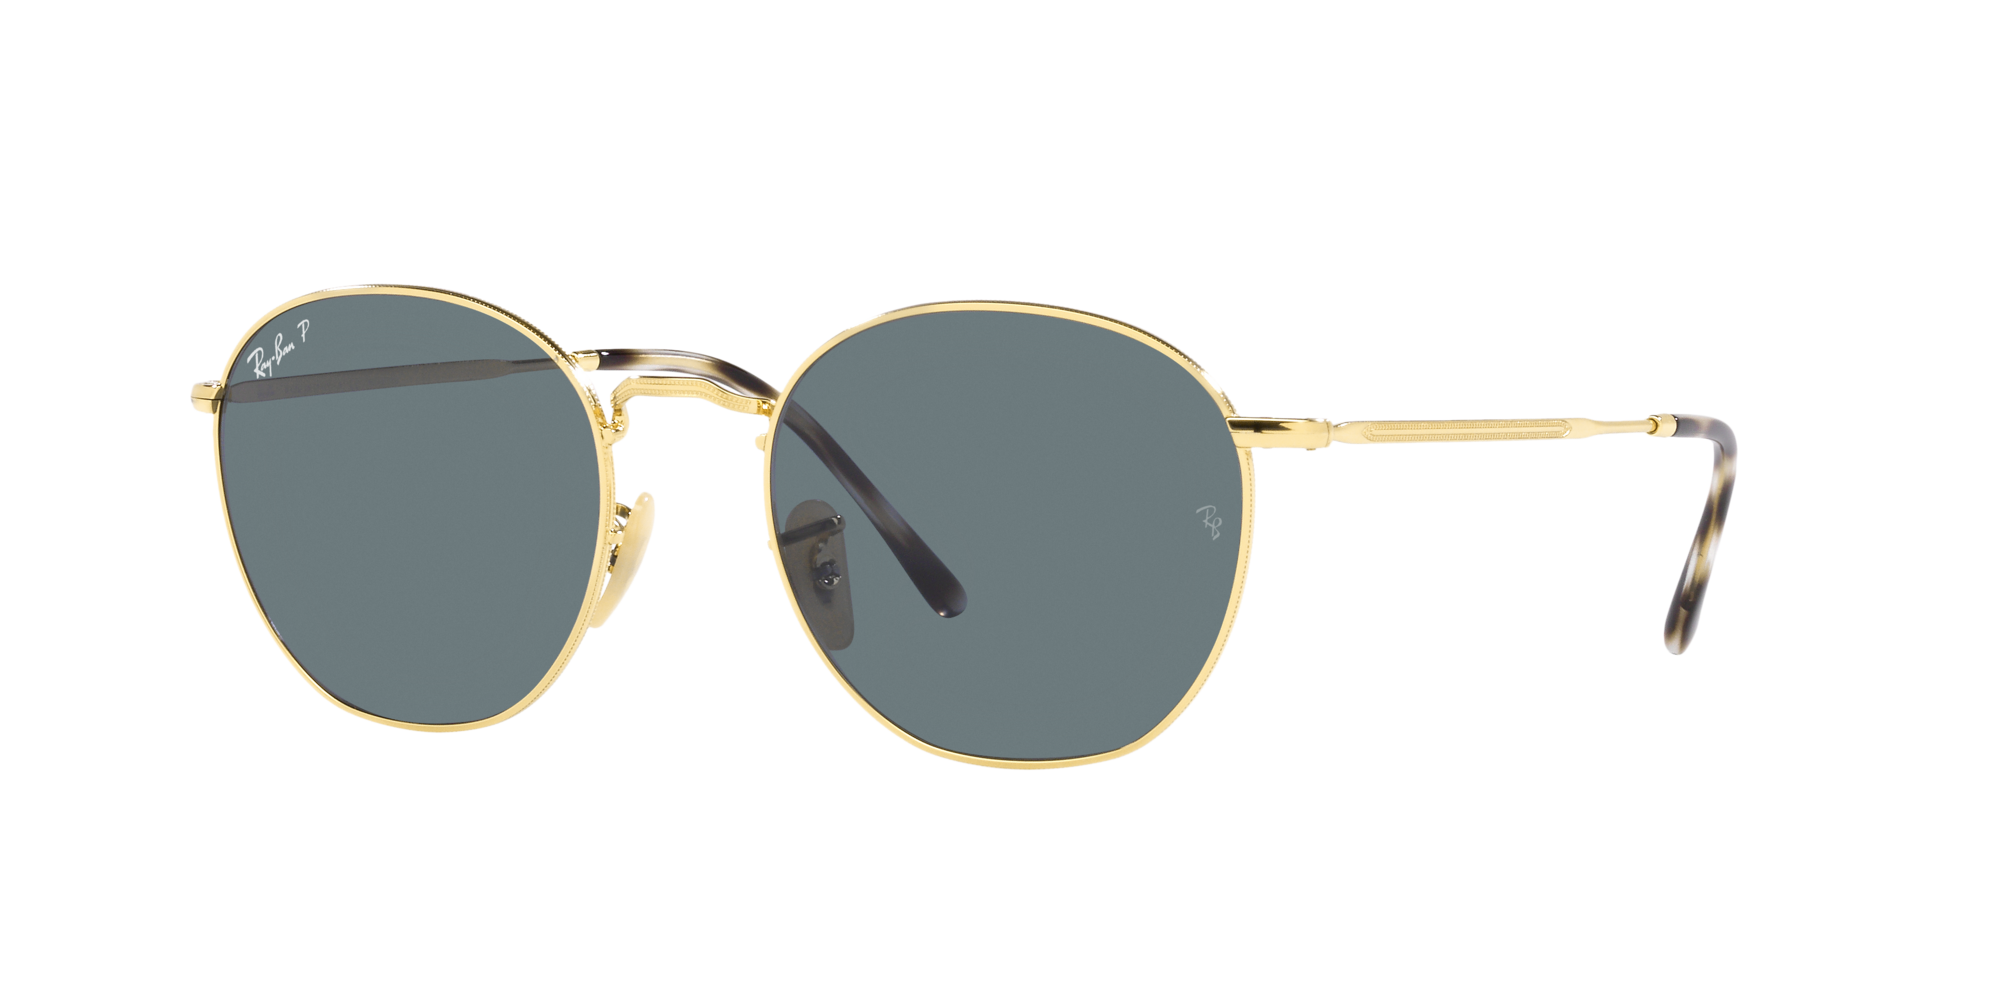 Rob Ray-Ban Sonnenbrille in Gold RB3772 001/3R 54